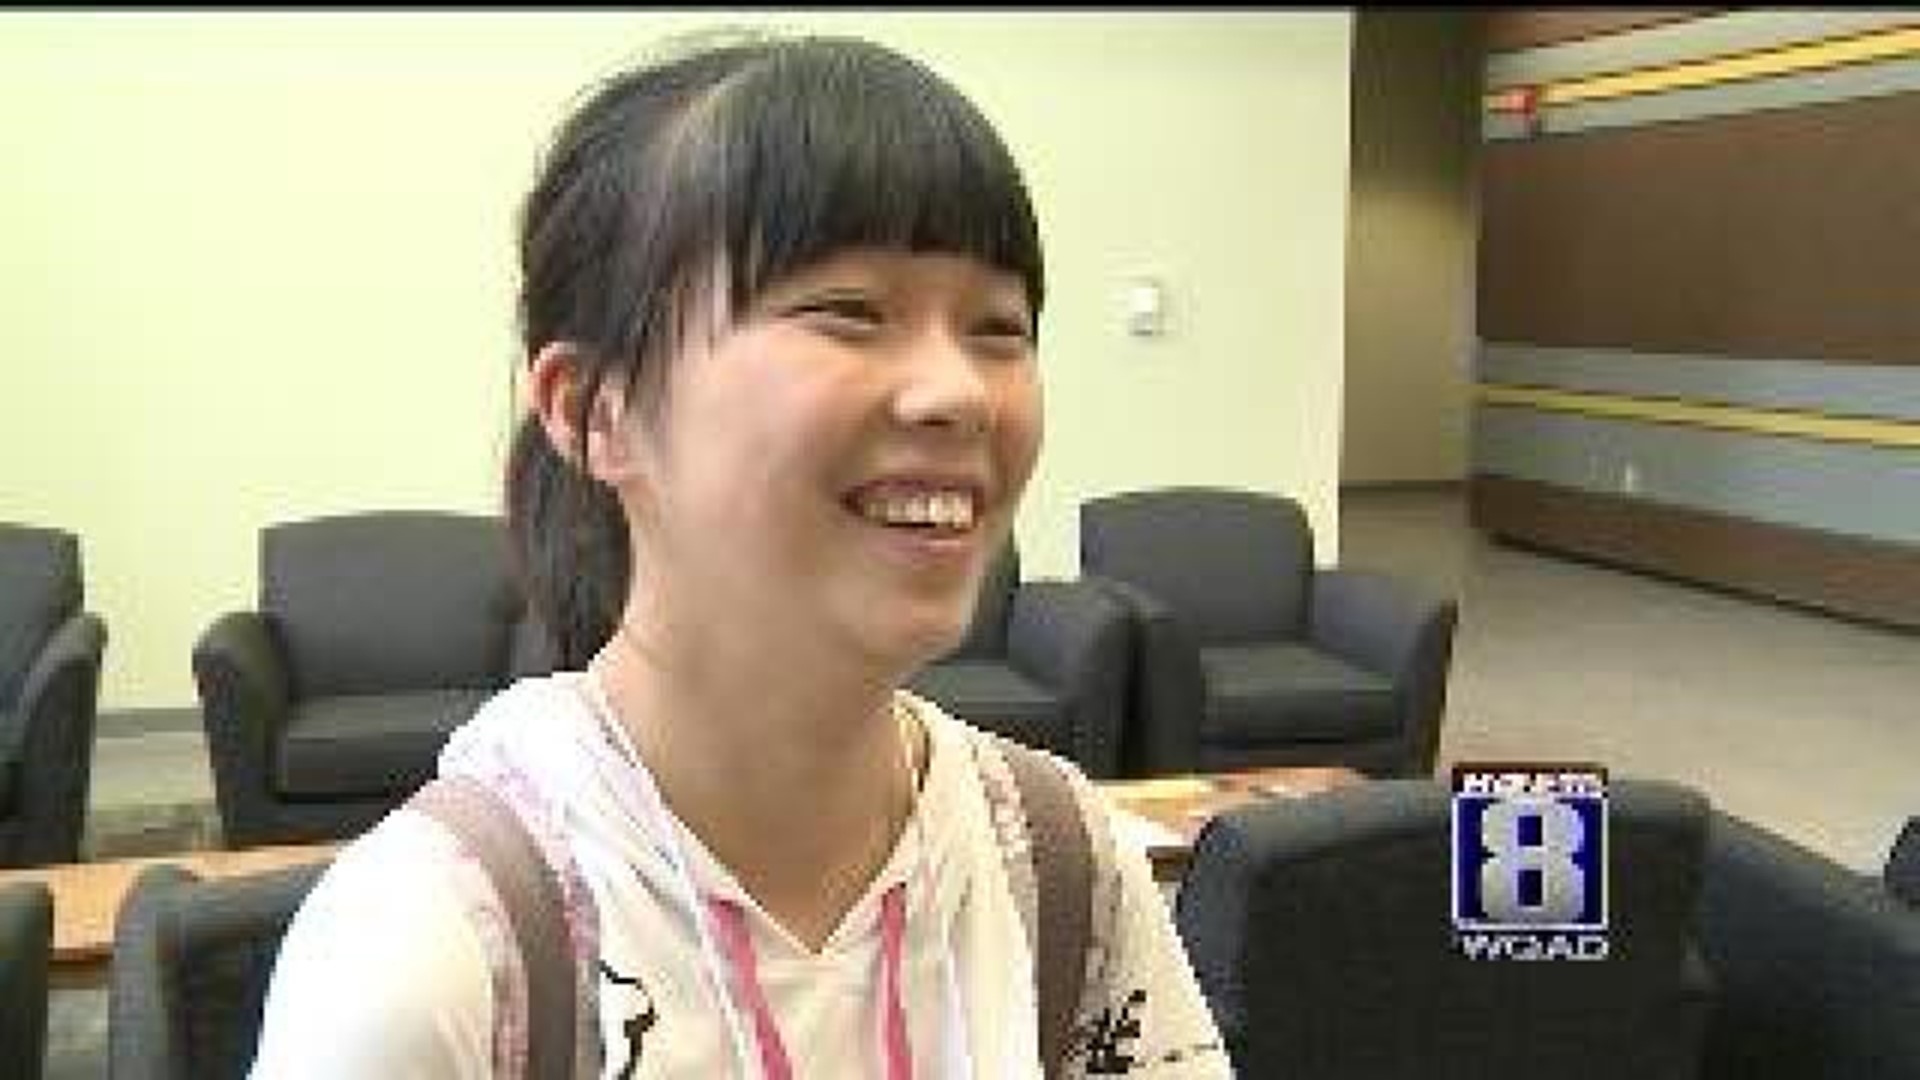 Chinese students visit our area